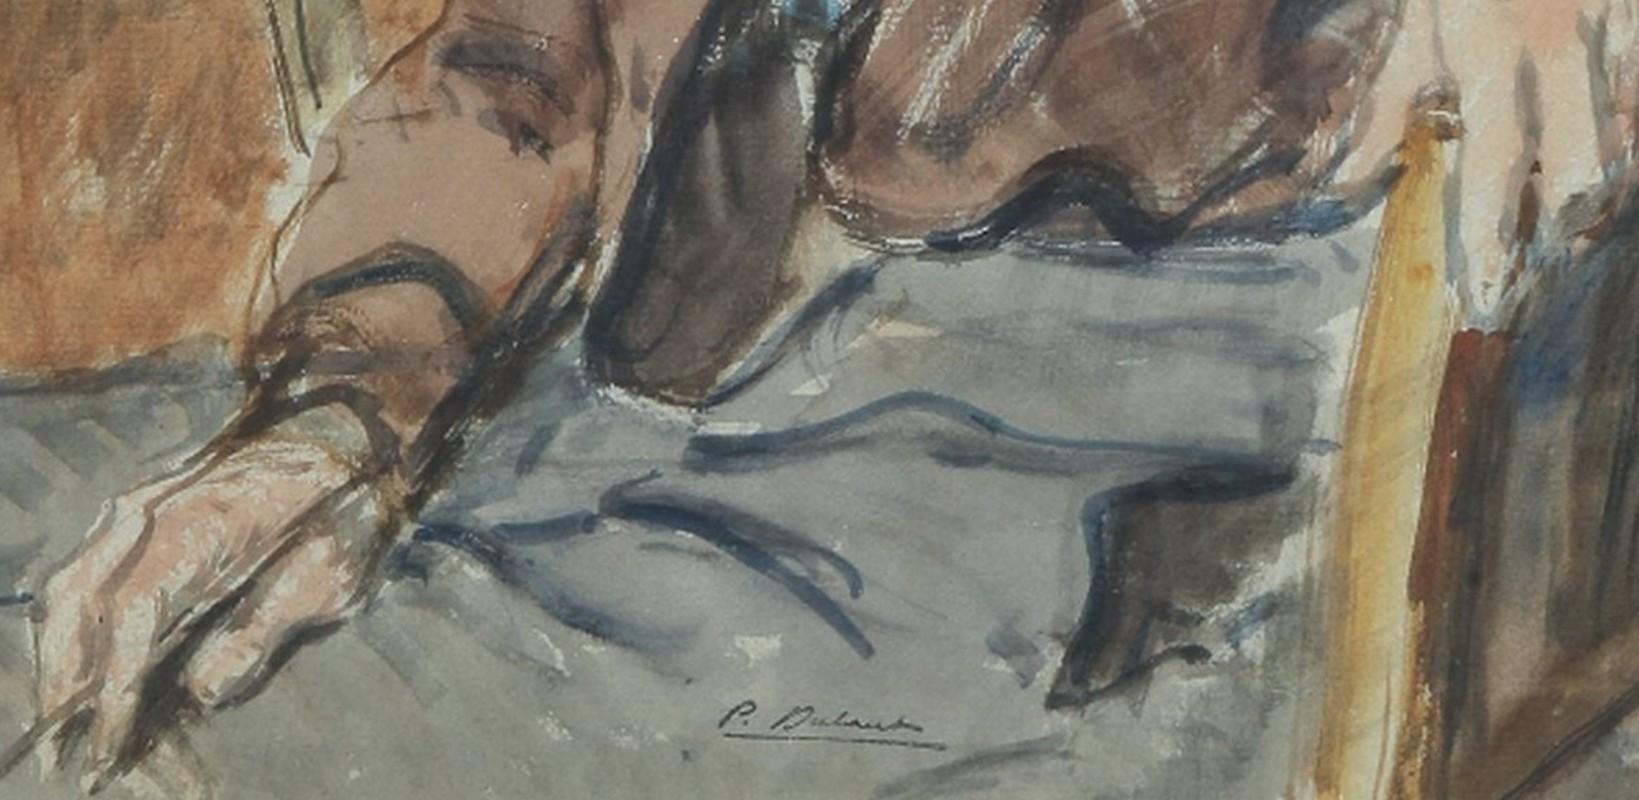 Pierre Olivier Dubaut (1886-1968) 
Portrait of an artist
Stamp of the artist on the lower part
watercolor on paper
46.5 x 30 cm

In a vintage frame : 58 x 42 cm, some damages in the mat at the uppper right, see detail photograph please.

Pierre